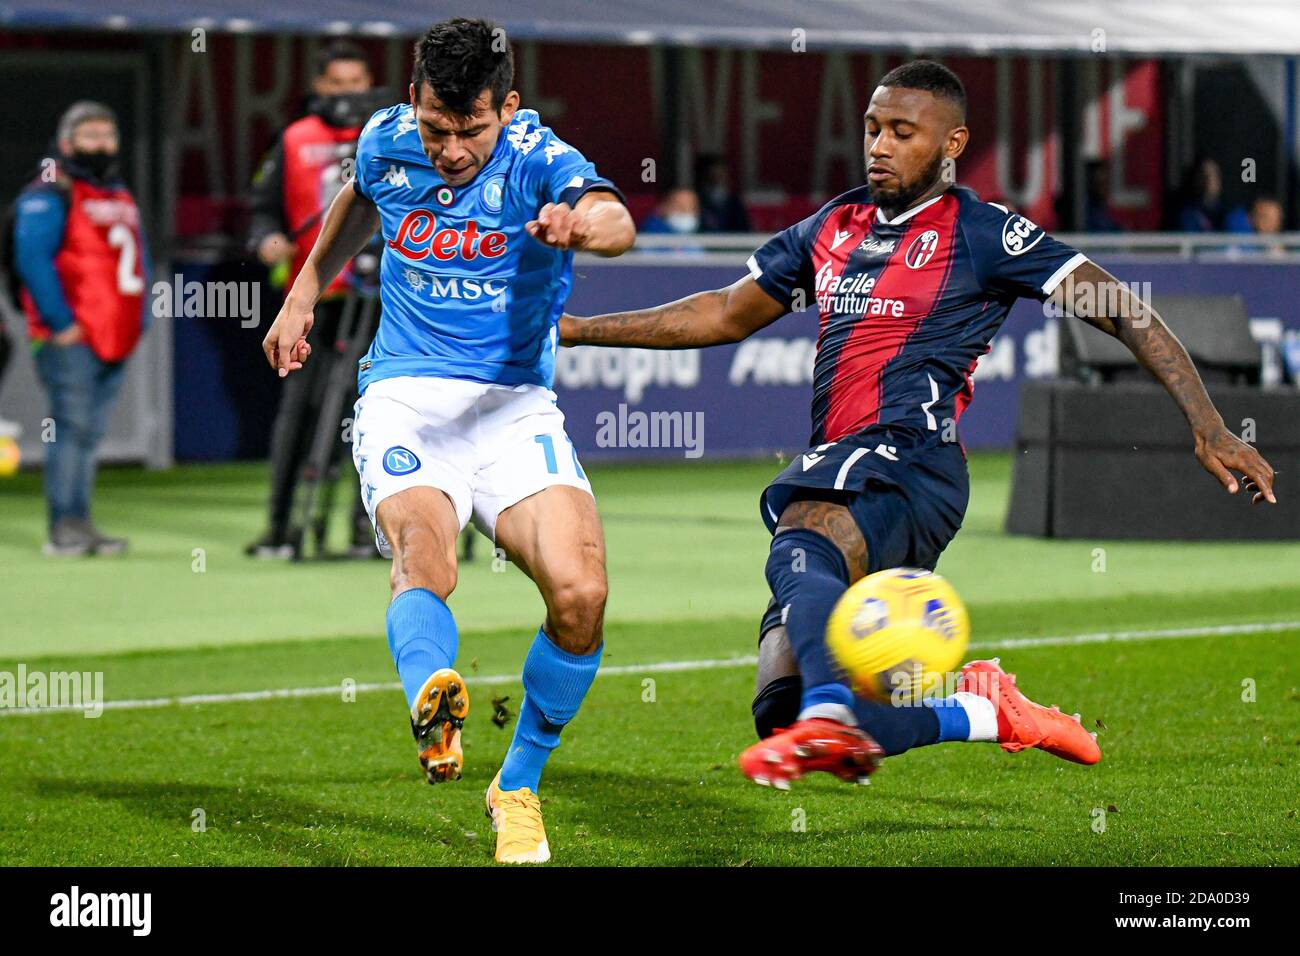 Bologna, Italy. 08th Nov, 2020. Hirving Lozano (Napoli) fights for the ball against Stefano Denswil (Bologna) during Bologna Calcio vs SSC Napoli, Italian soccer Serie A match in Bologna, Italy, November 08 2020 Credit: Independent Photo Agency/Alamy Live News Stock Photo